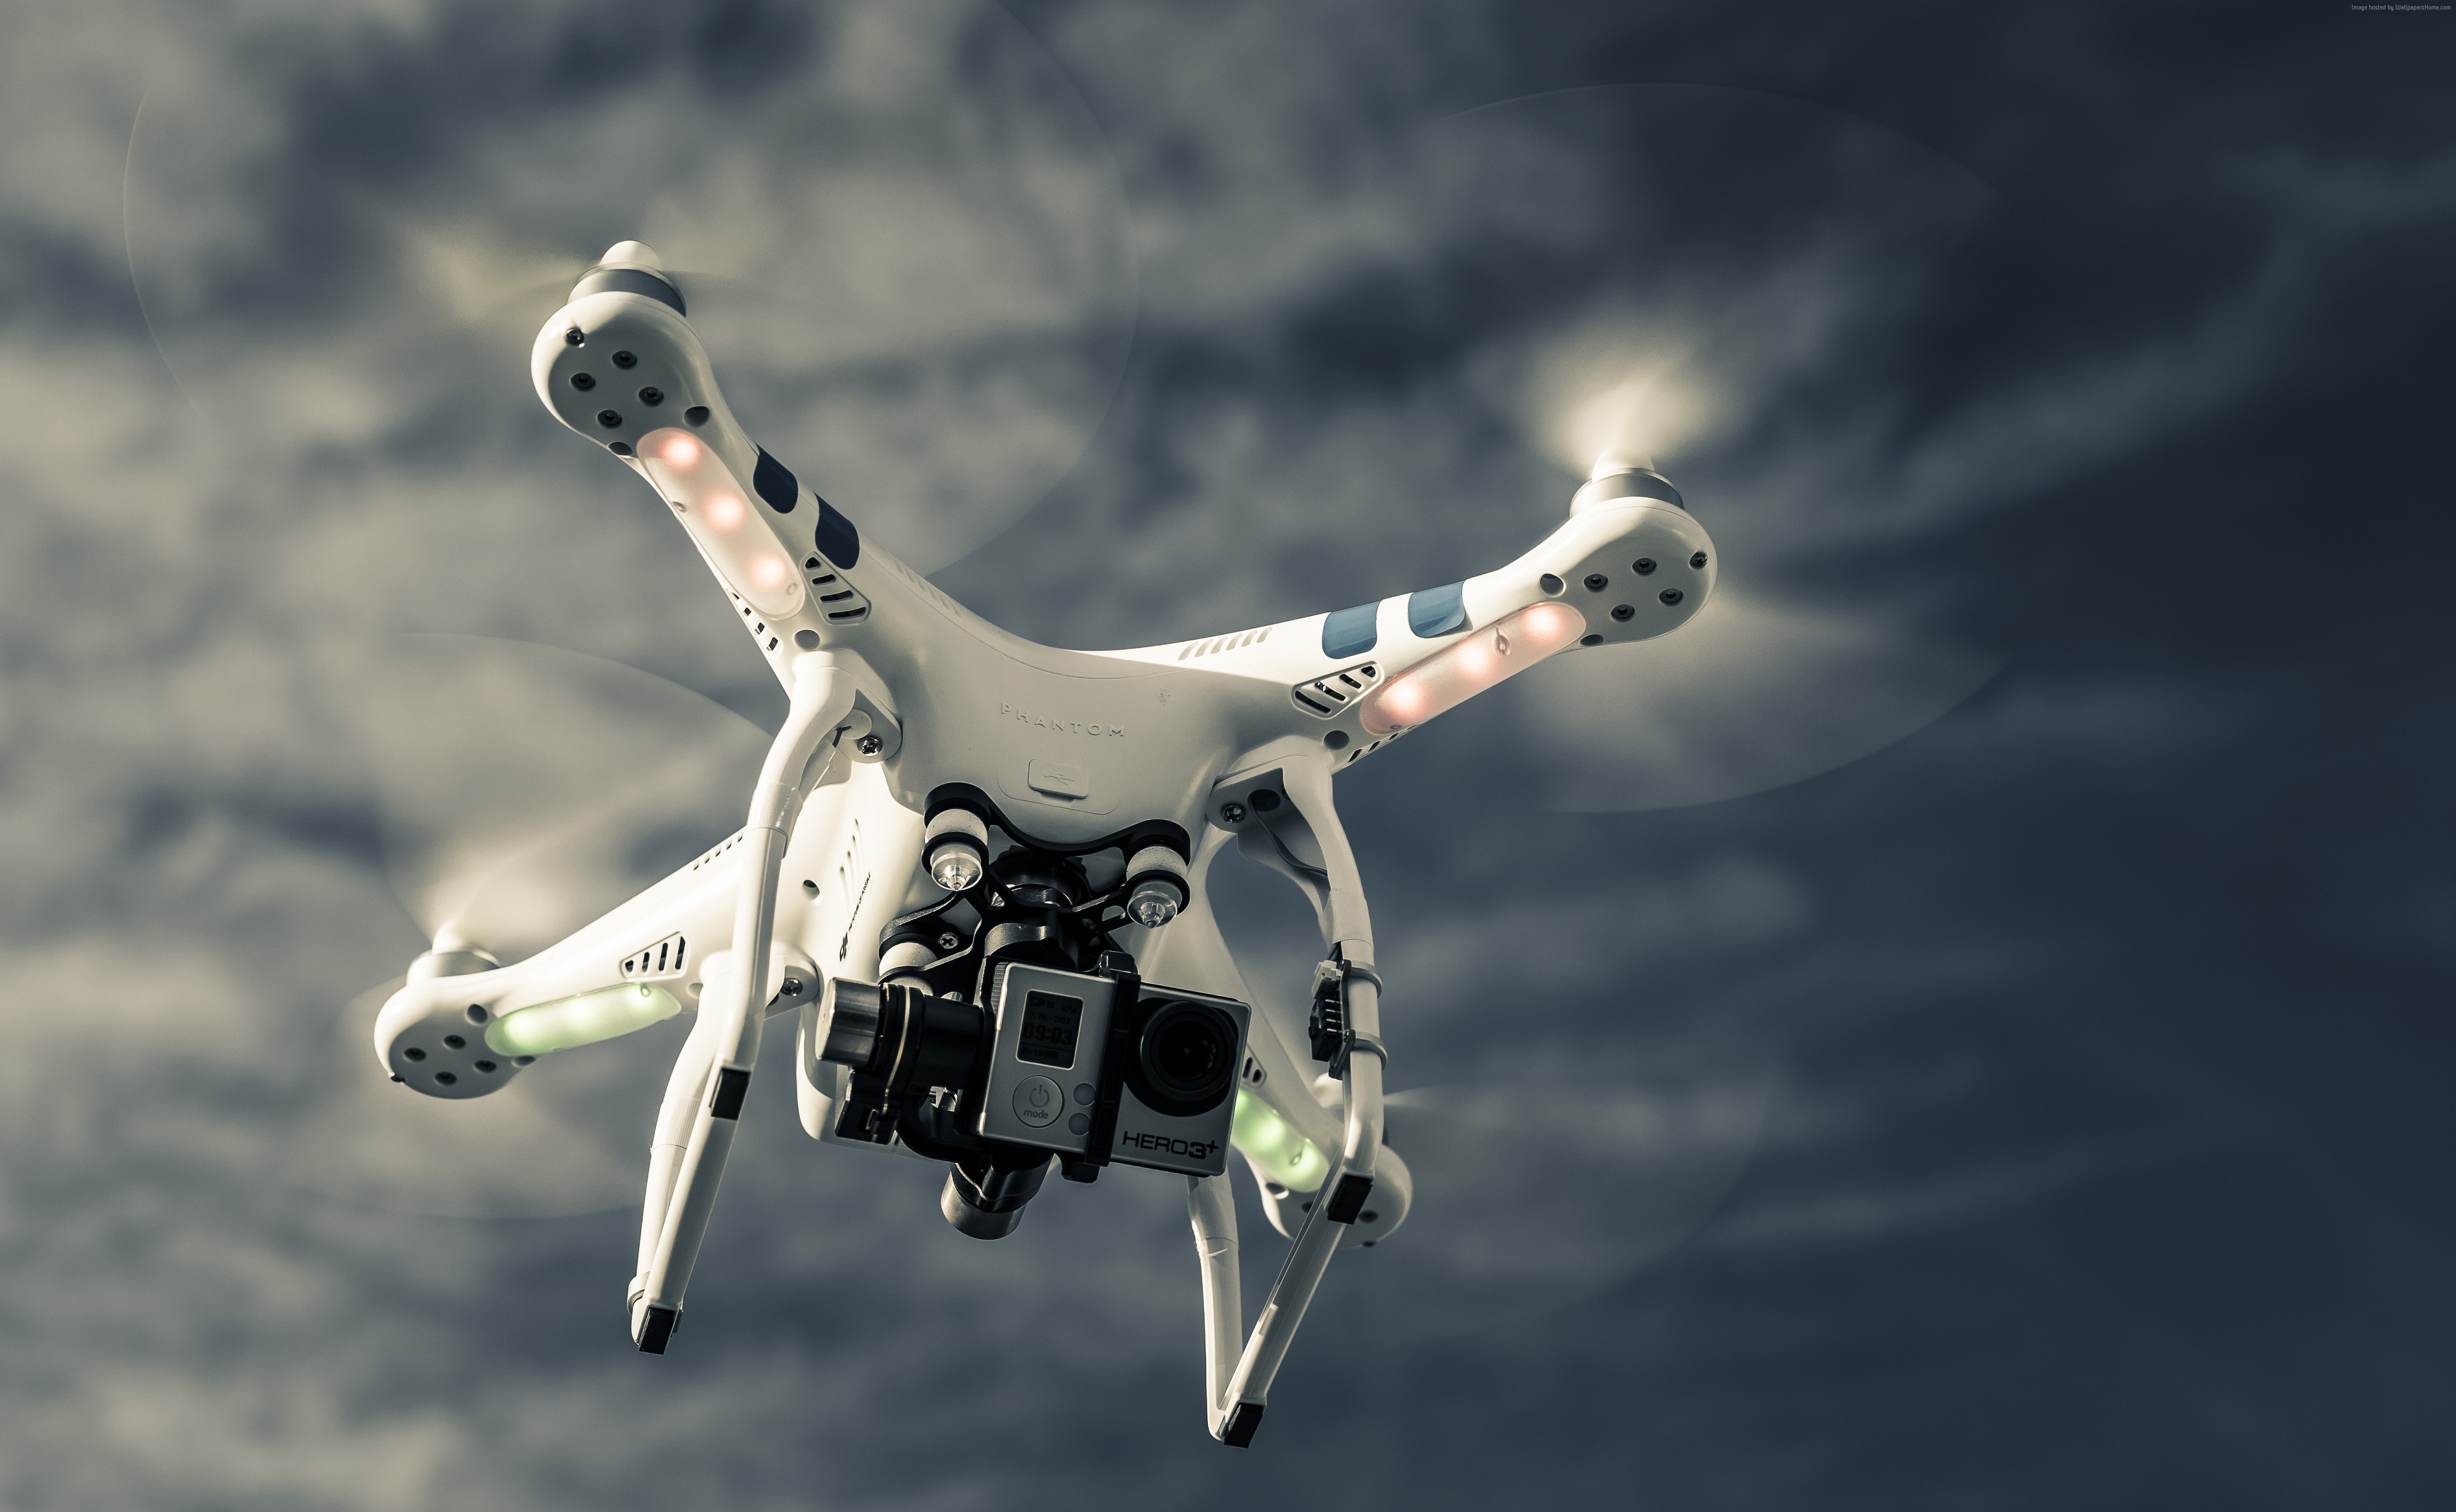 Drone Stock Photos Royalty Free Drone Images  Depositphotos